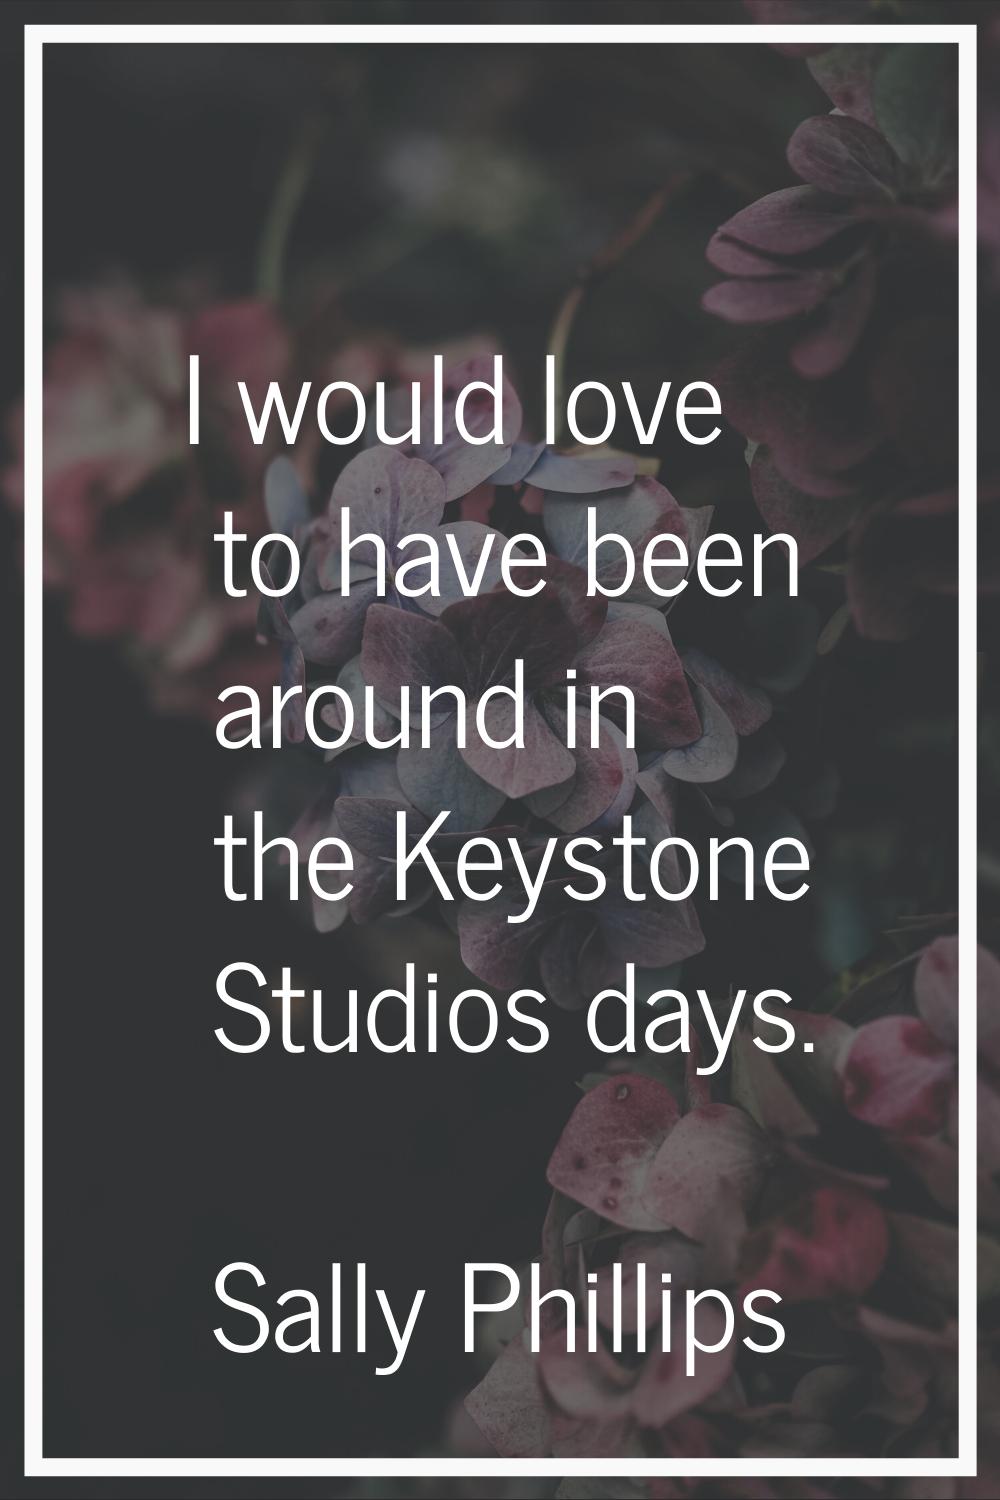 I would love to have been around in the Keystone Studios days.